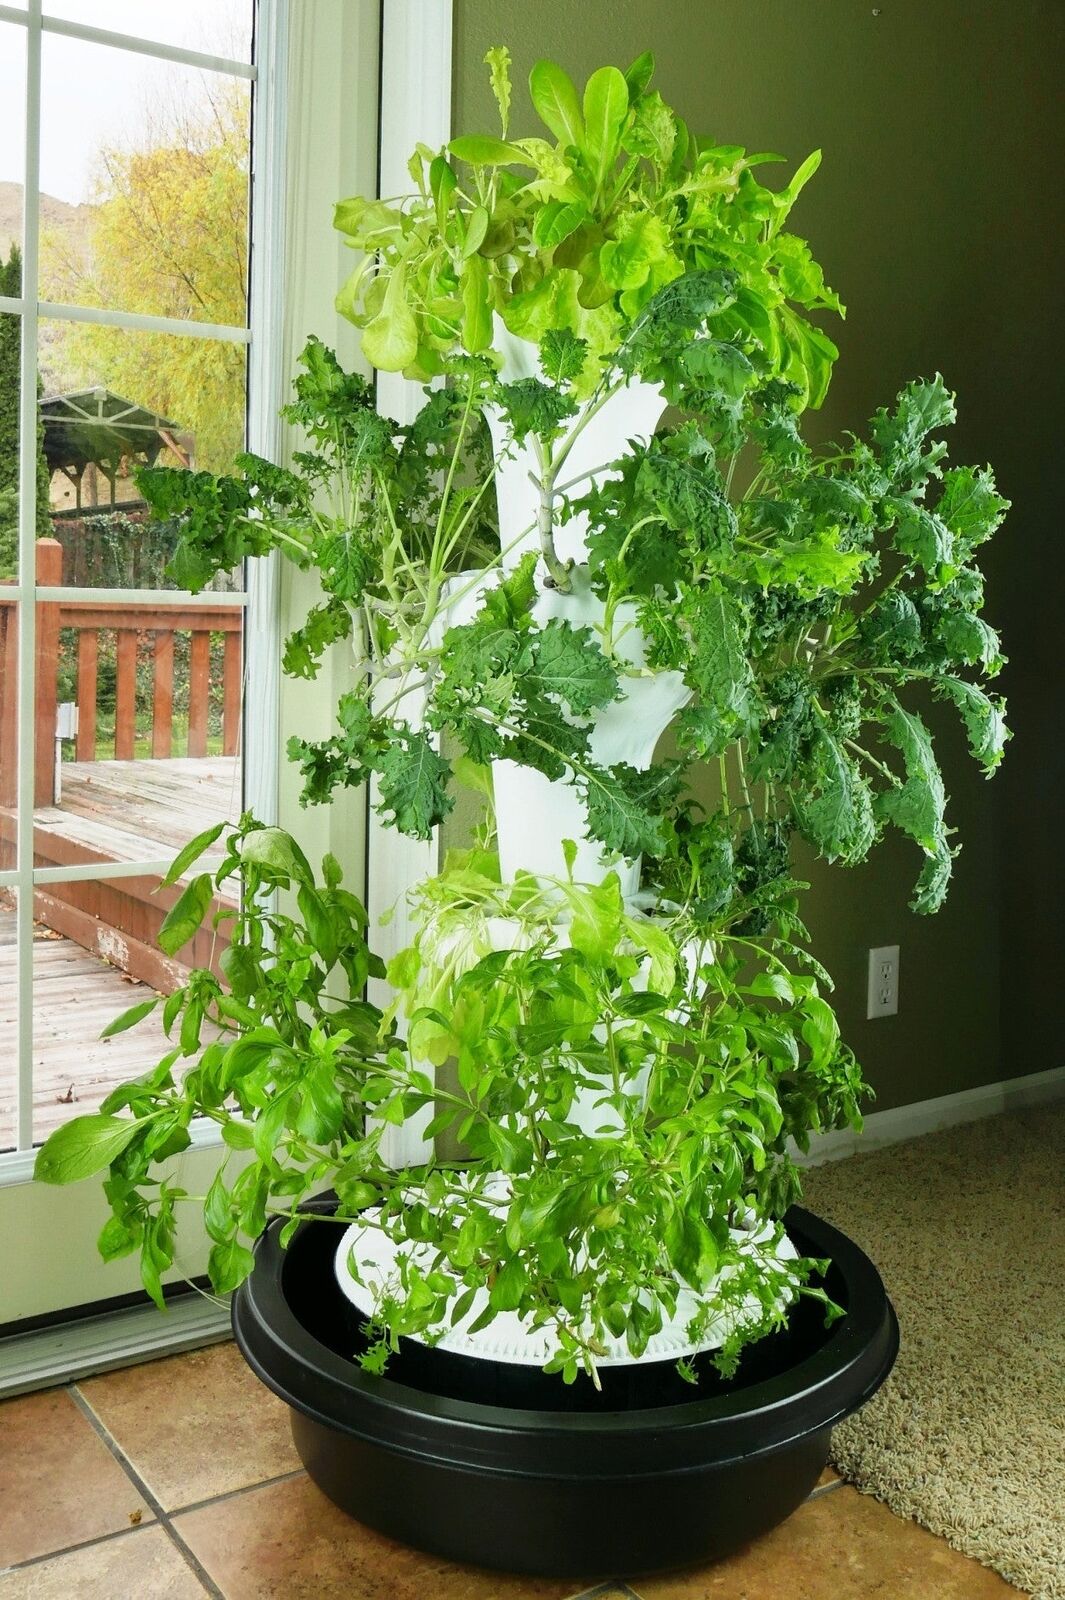 Foody 12 Hydroponic Tower Garden System - 44 Plant Ebb and Flow System